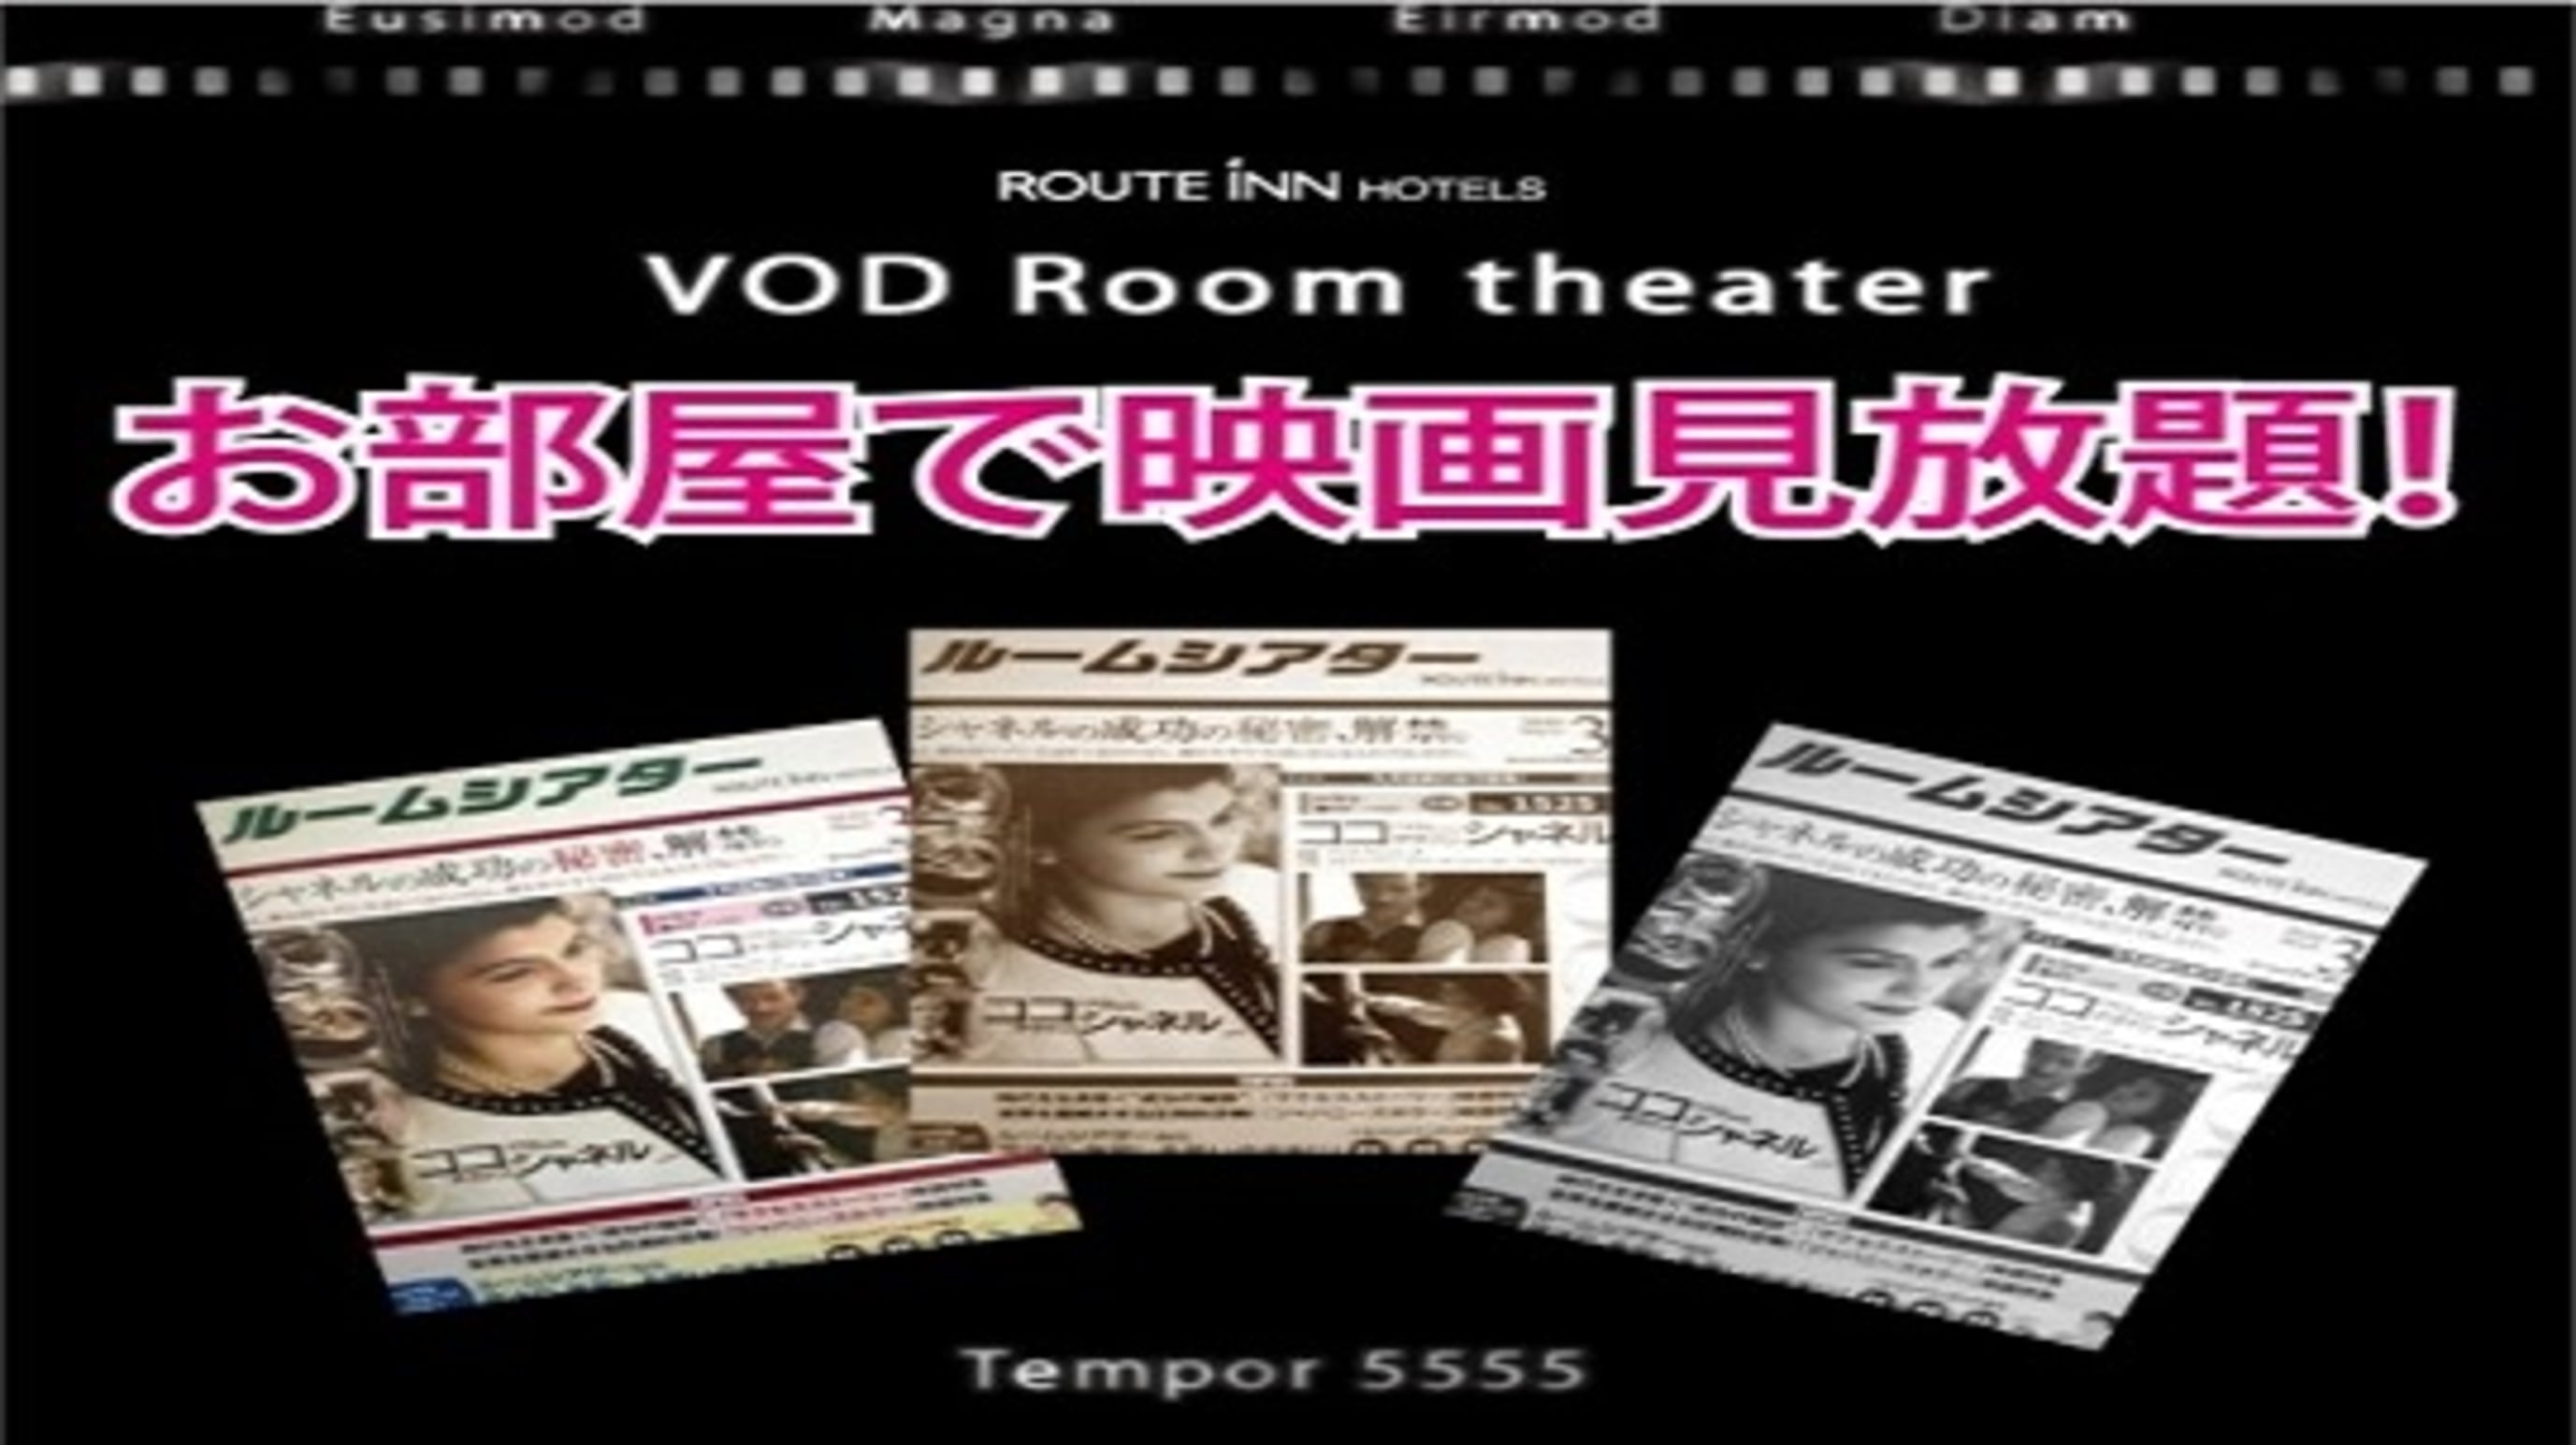 Plan with room theater (VOD)